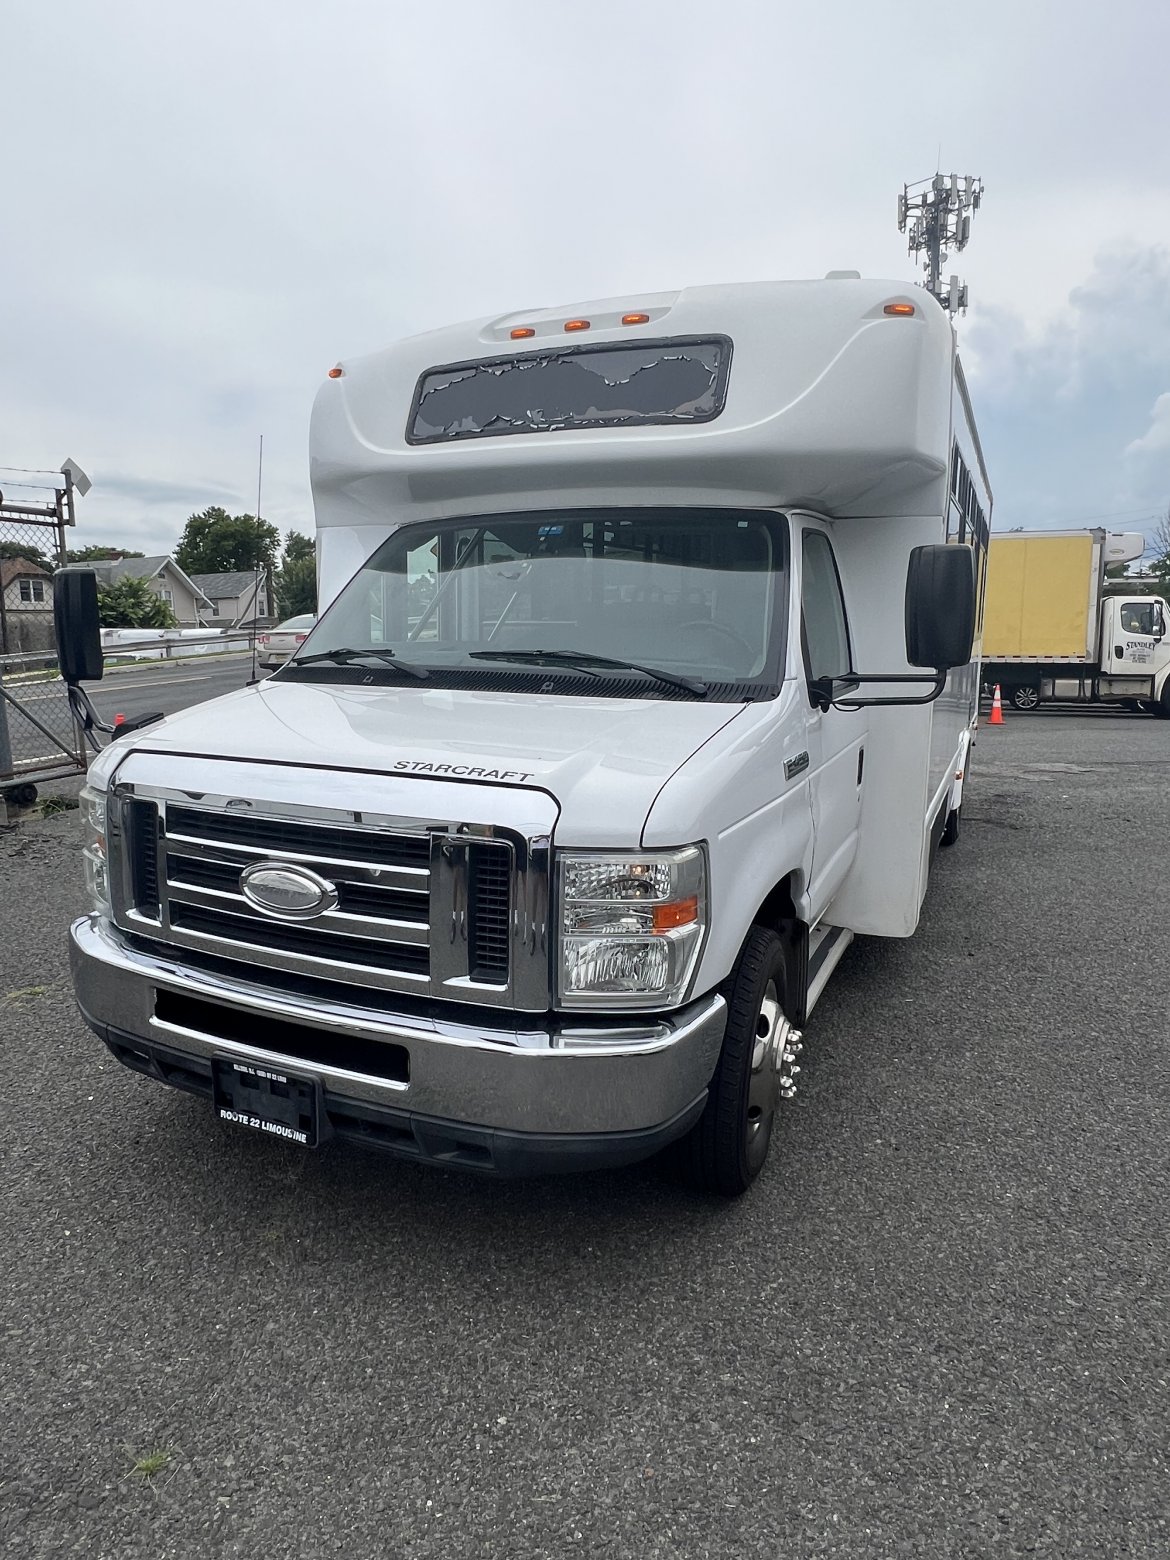 Executive Shuttle for sale: 2015 Ford E450 28&quot; by Starcraft